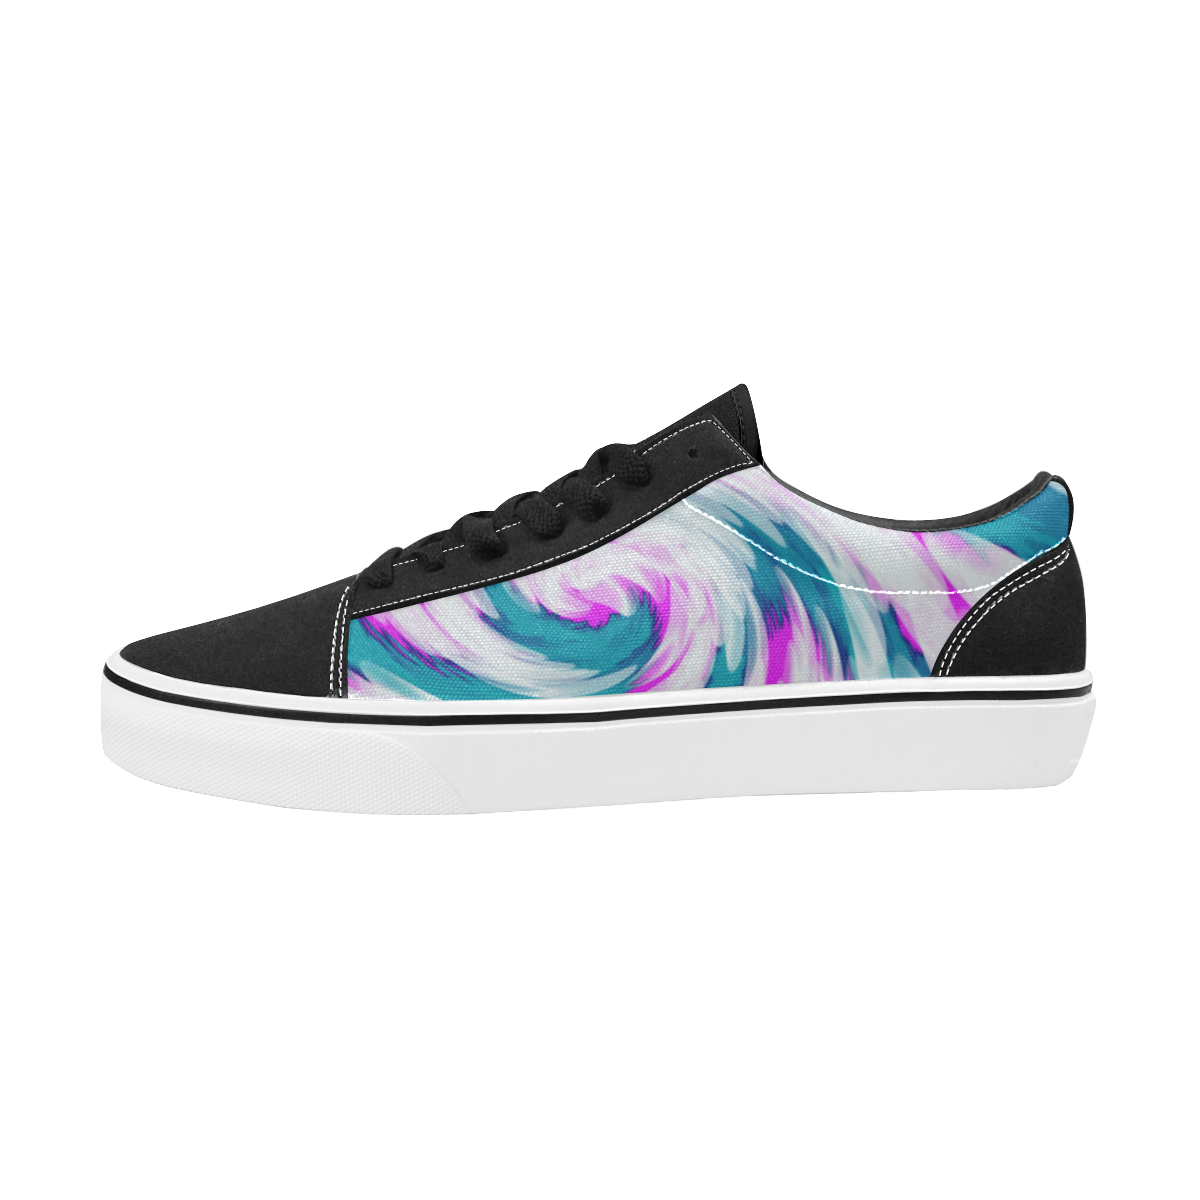 Turquoise Pink Tie Dye Swirl Abstract Women's Low Top Skateboarding Shoes/Large (Model E001-2)